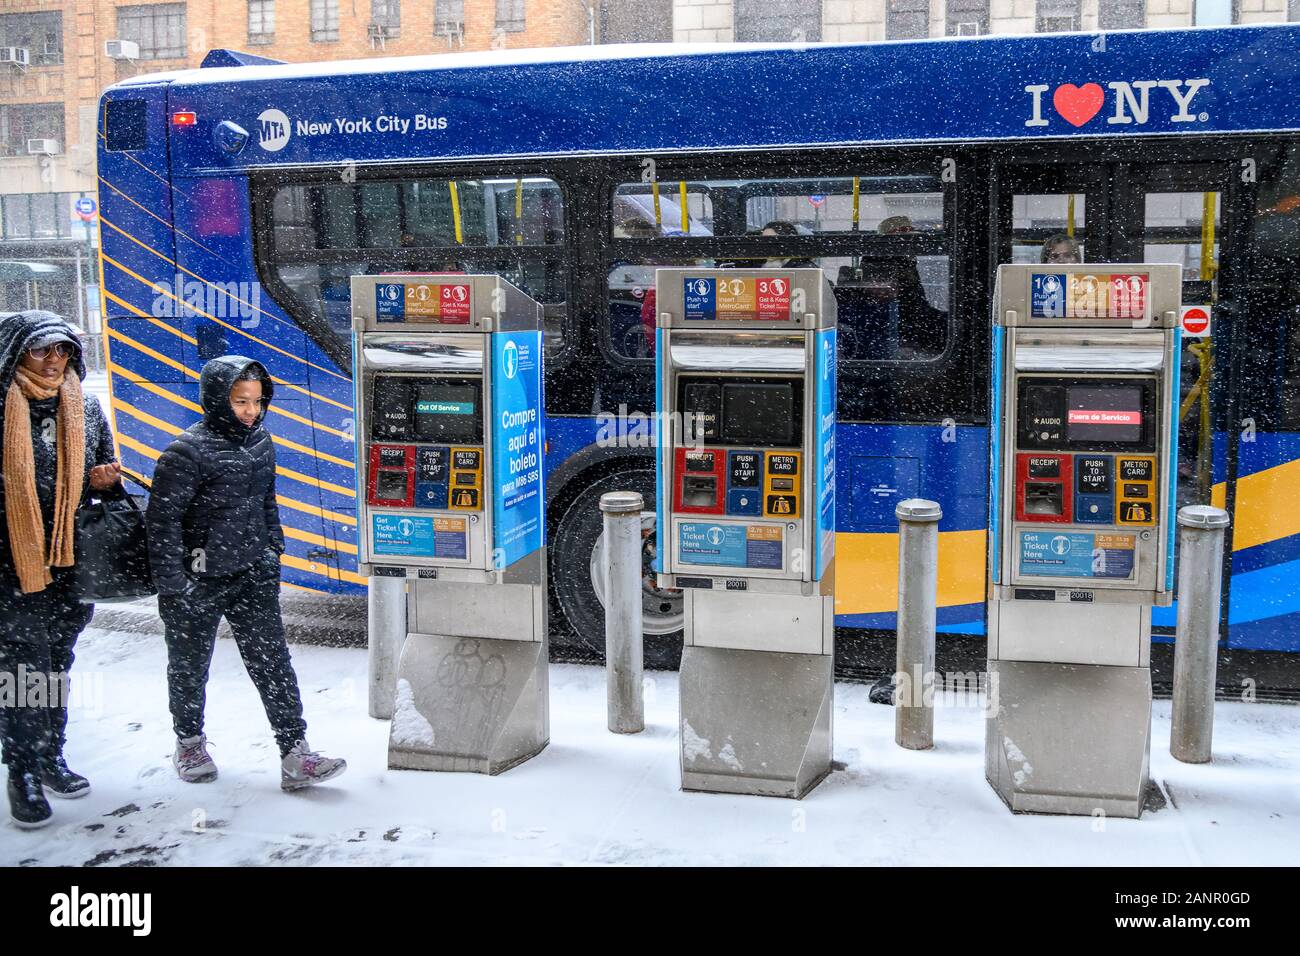 New York, USA,  18 January 2020. Two out of three ticket dispensers are out of order at a bus stop in New York City's Upper West Side during a snowstorm.   Credit: Enrique Shore/Alamy Live News Stock Photo